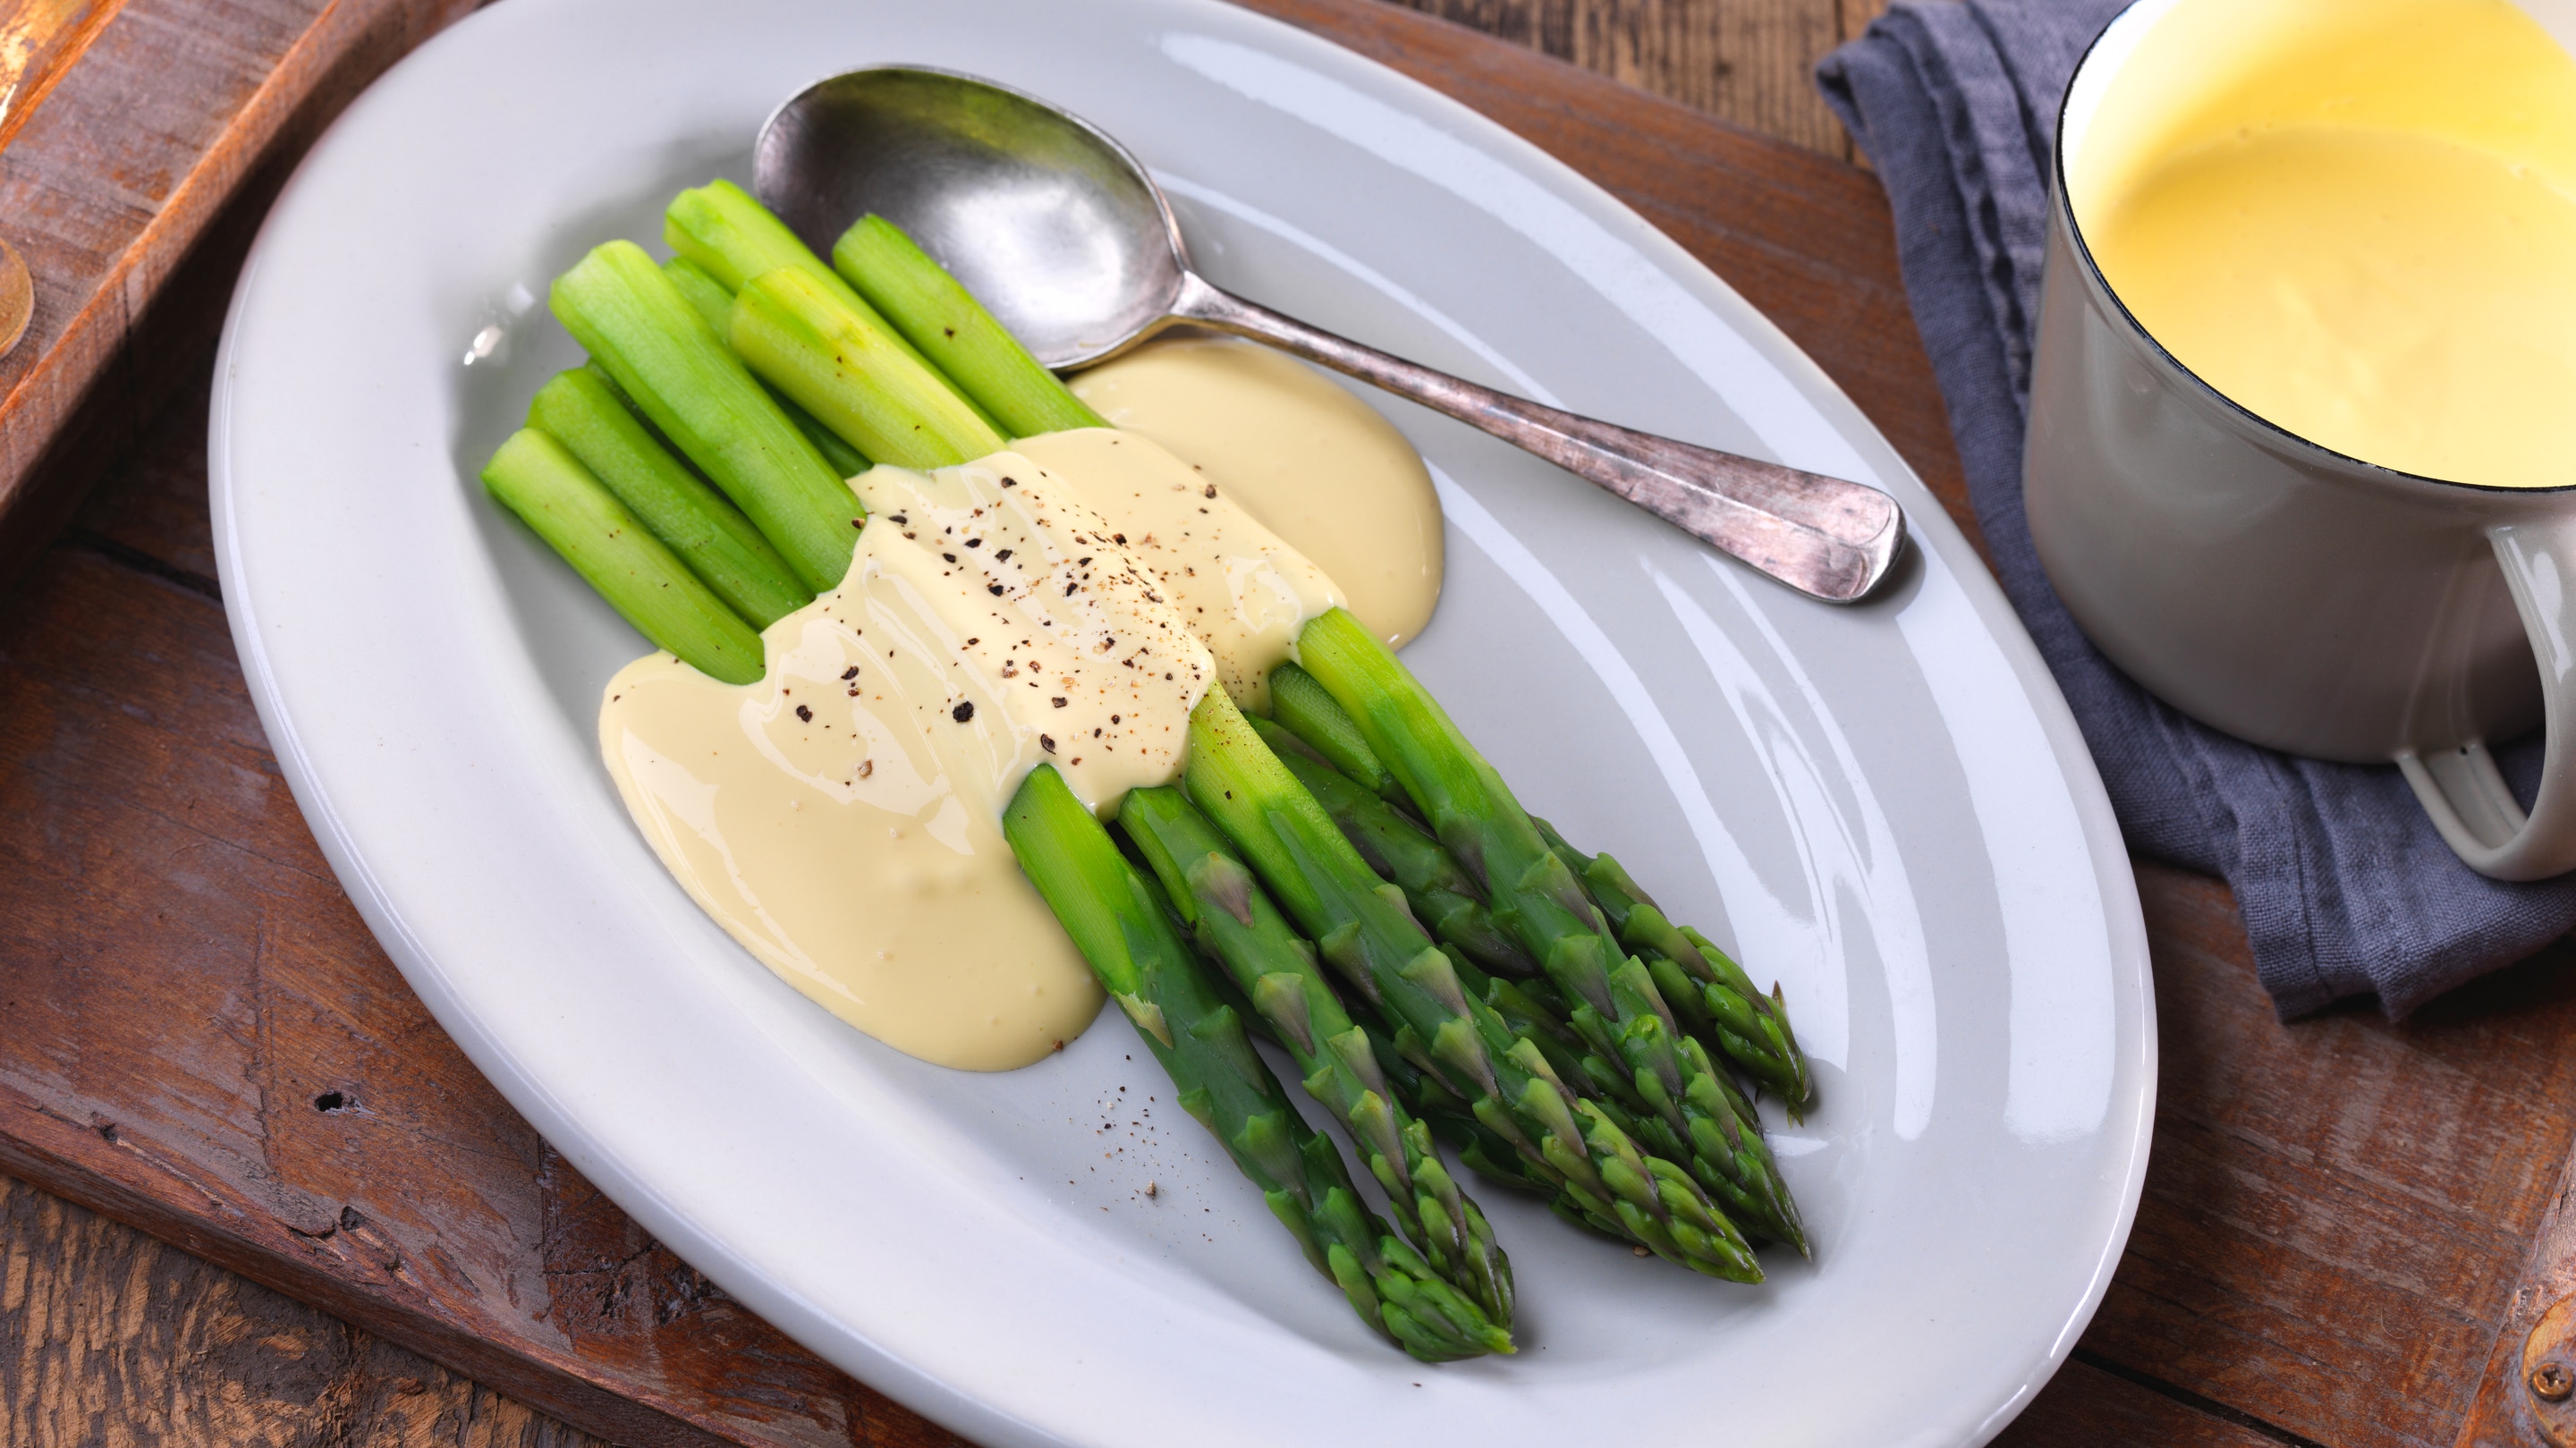 How to Make Knorr Hollandaise Sauce - Video